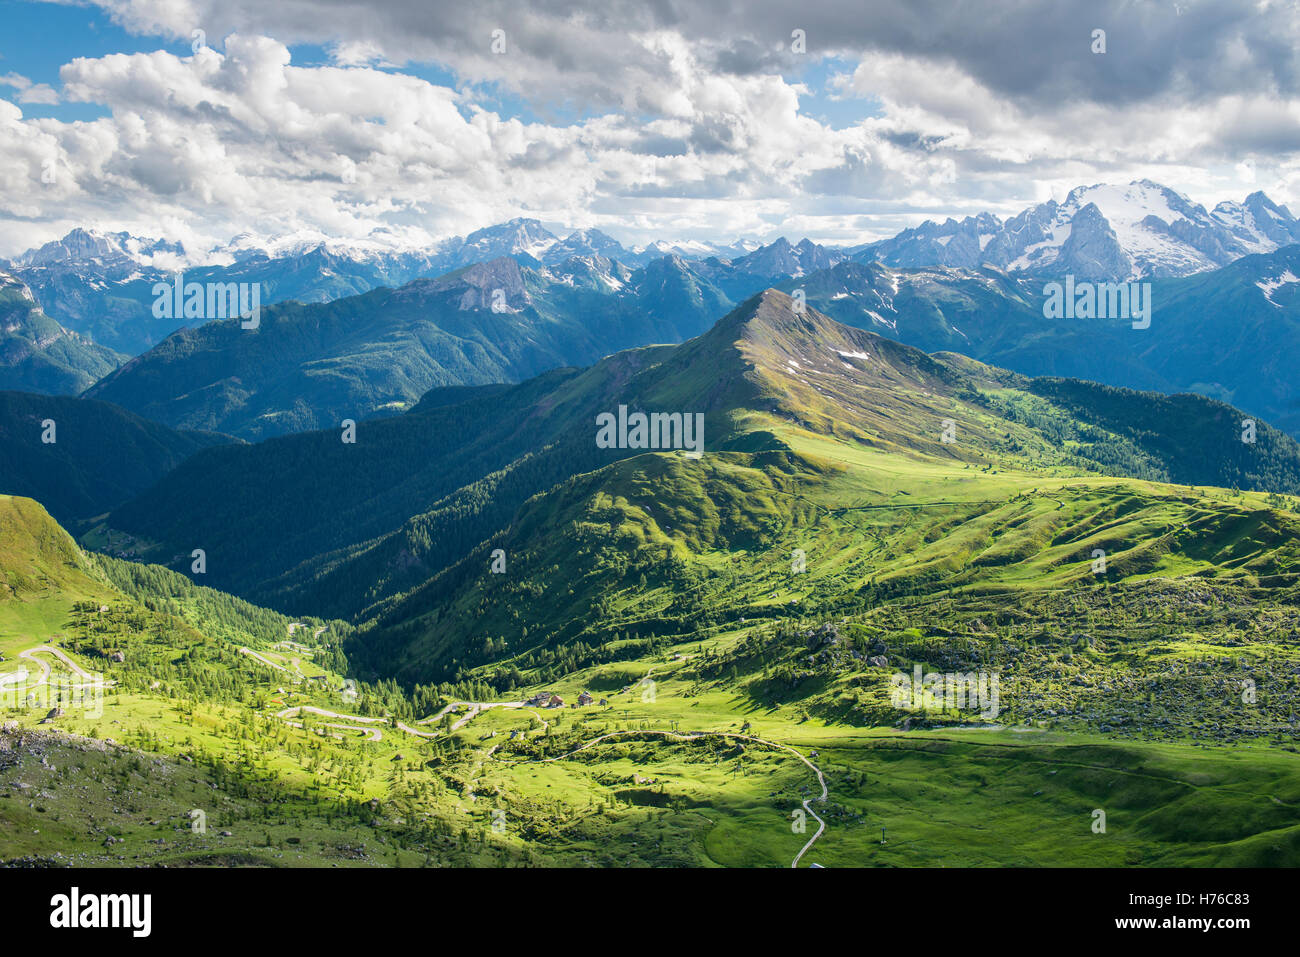 View from Nuvolau summit at the Dolomites, Italy. Stock Photo